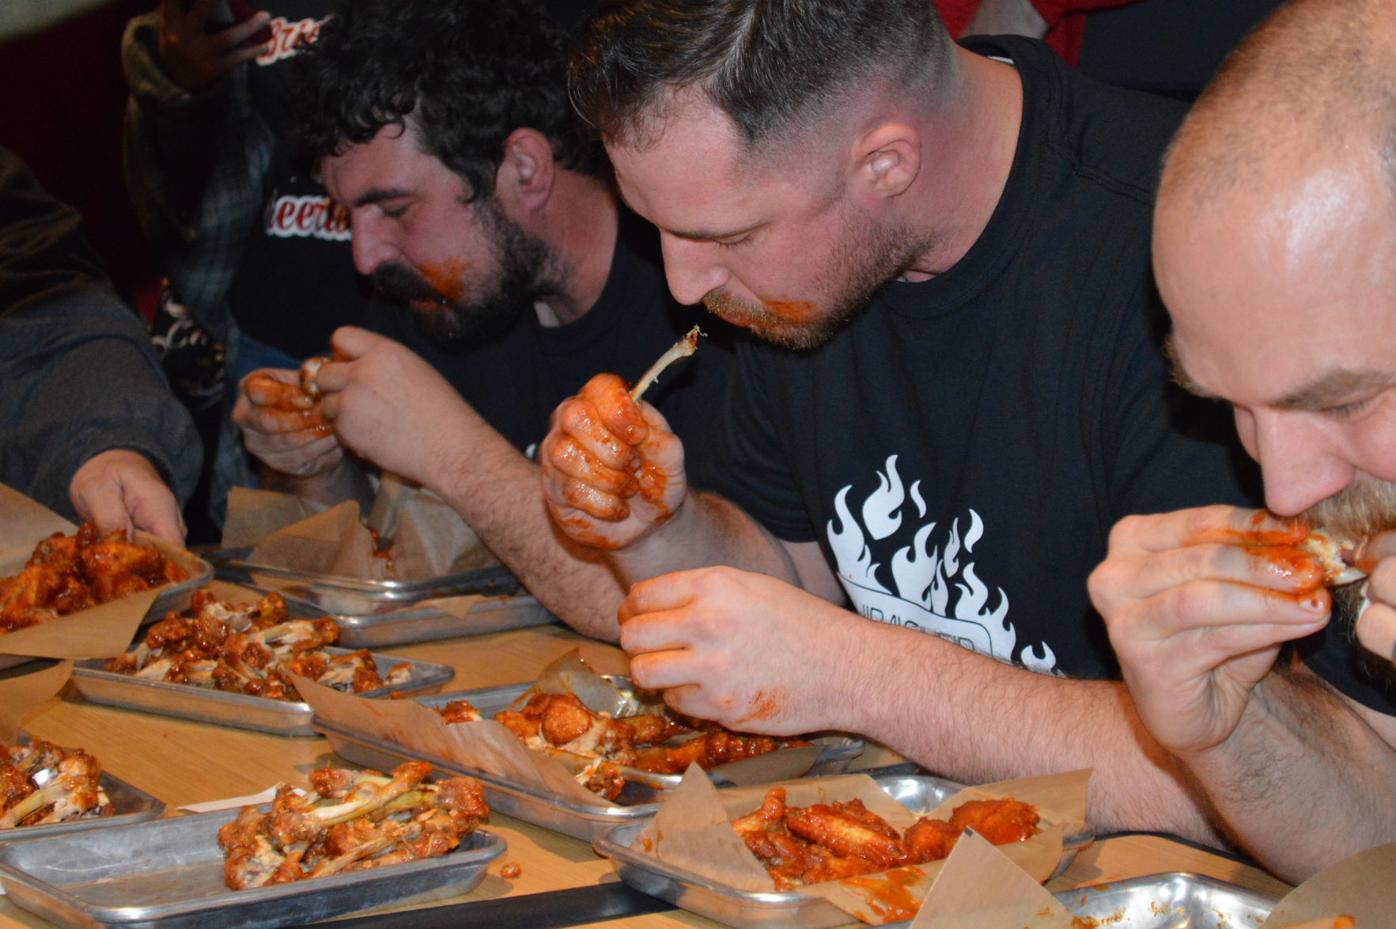 United Way Wing Eating Contest crowns new champion, raises 54,000